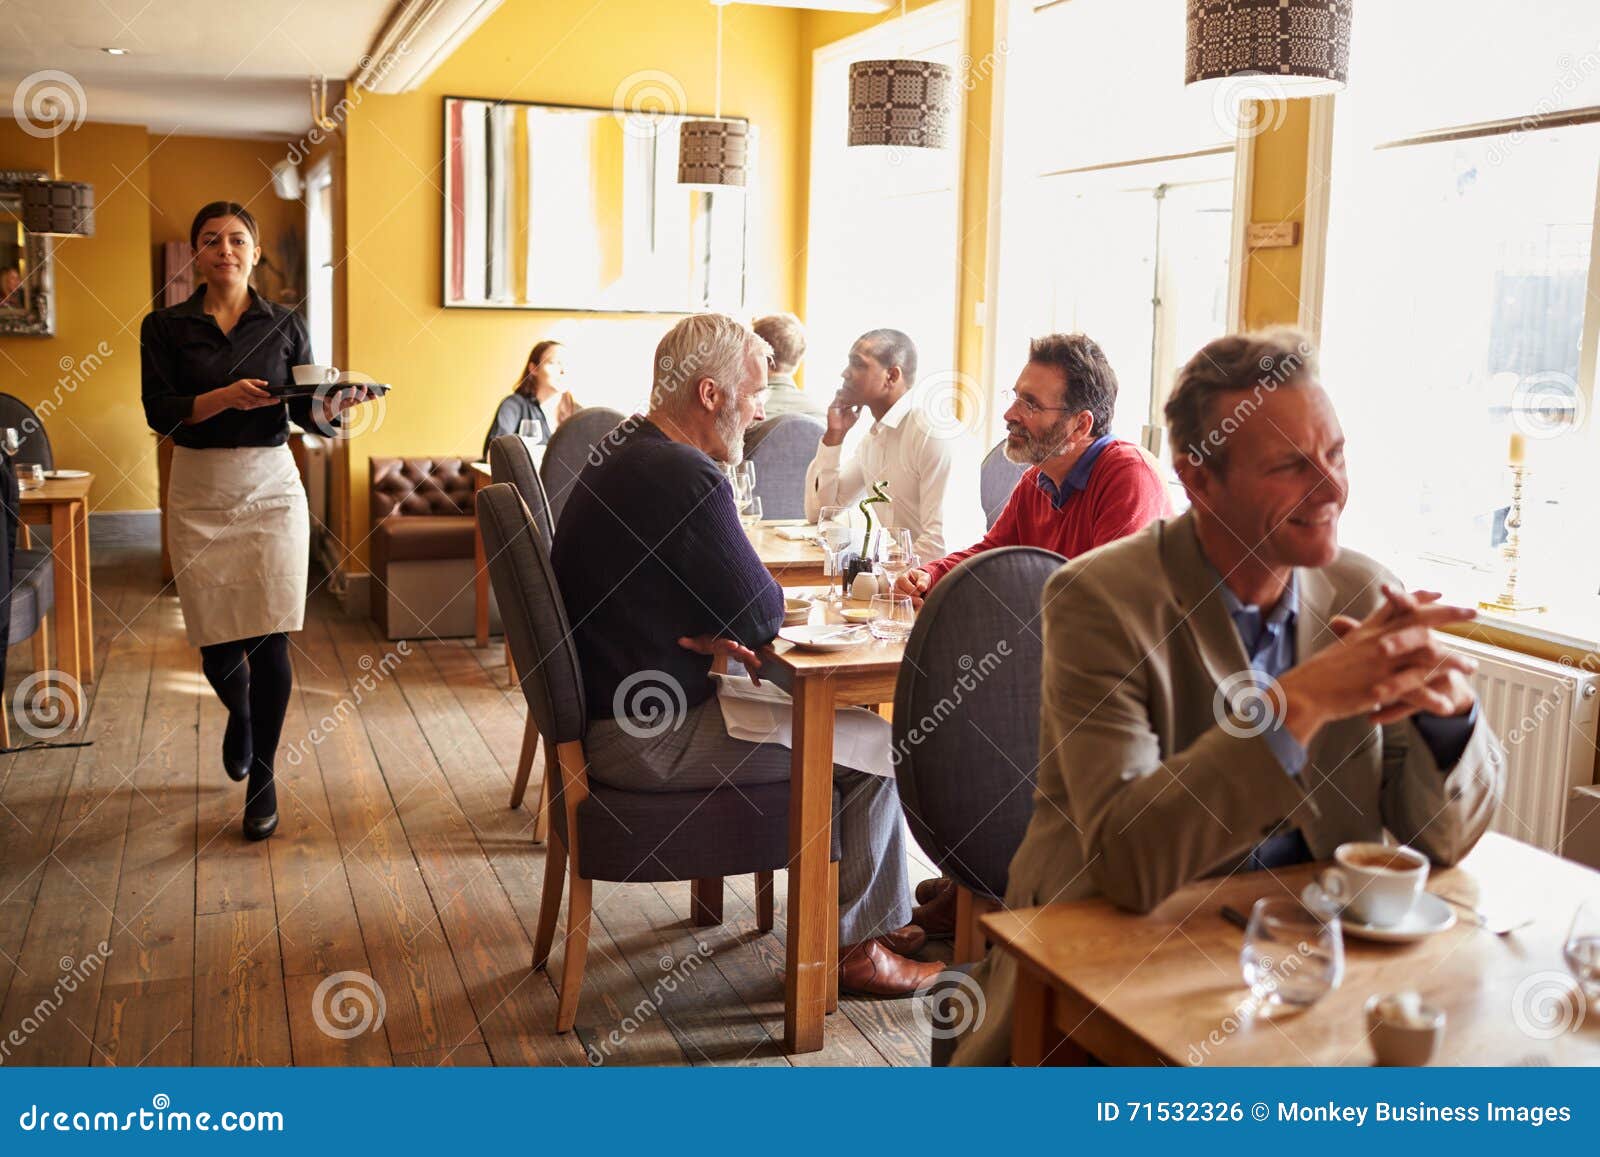 customers at tables and waitress in busy restaurant interior